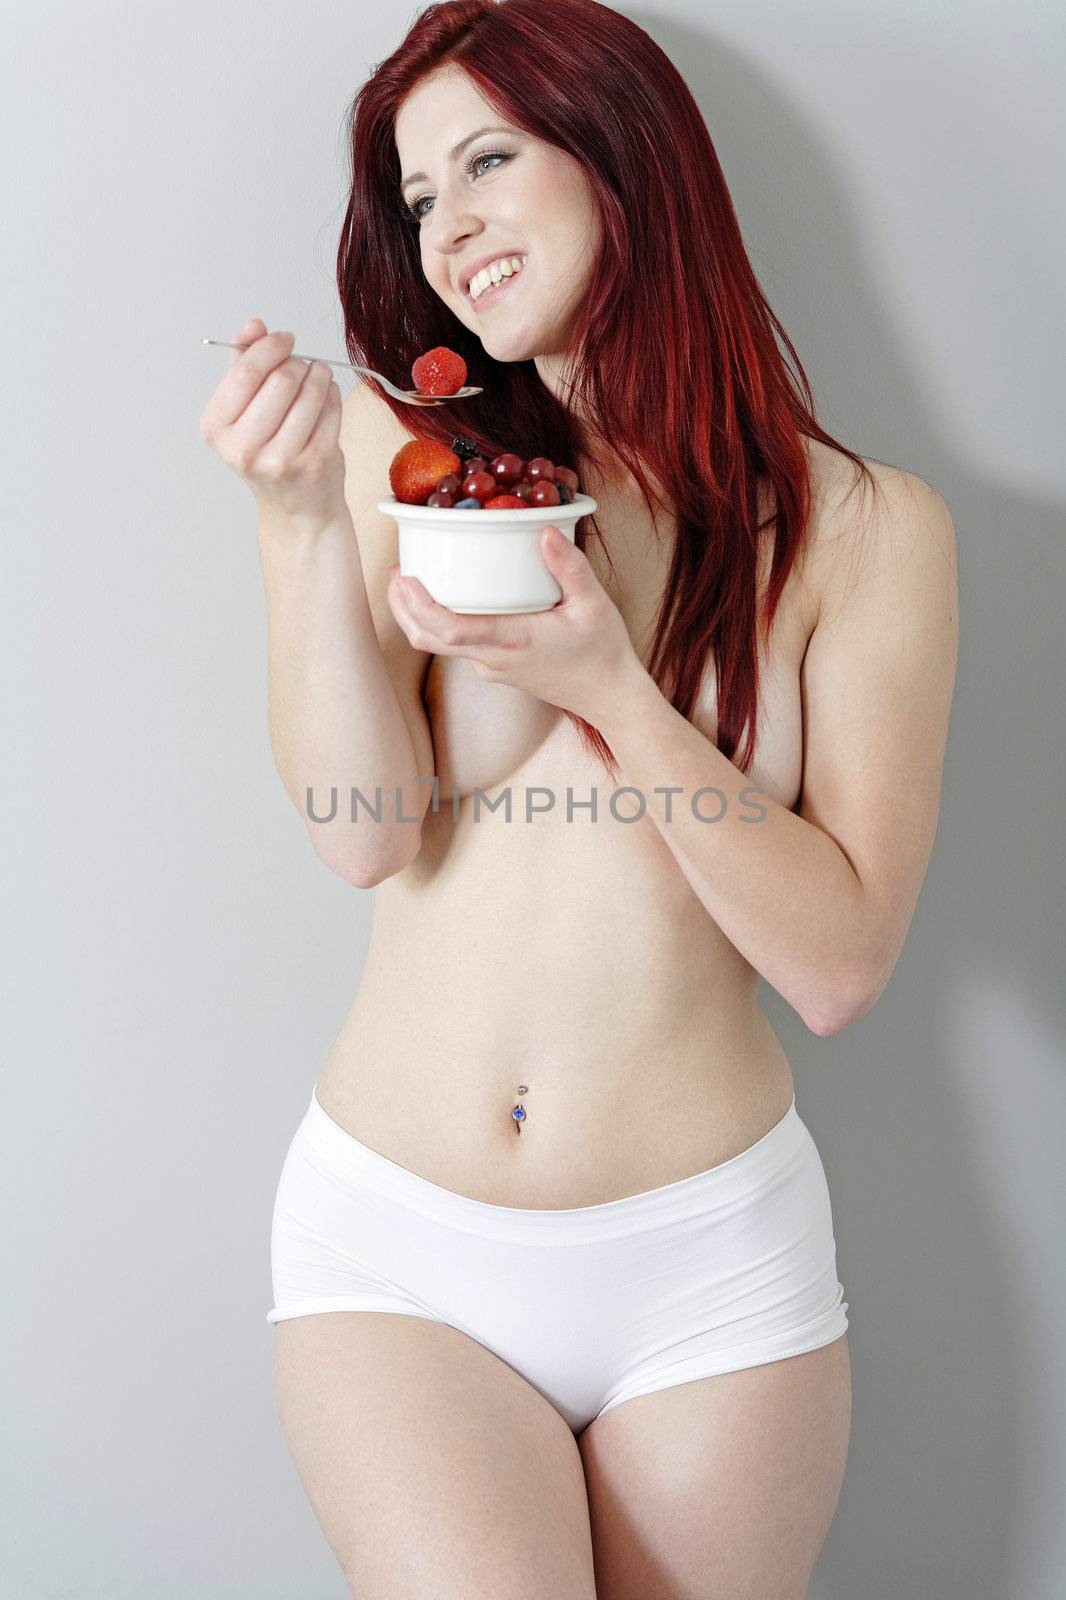 Happy young woman eating a bowl of fresh fruit in her underwear at home